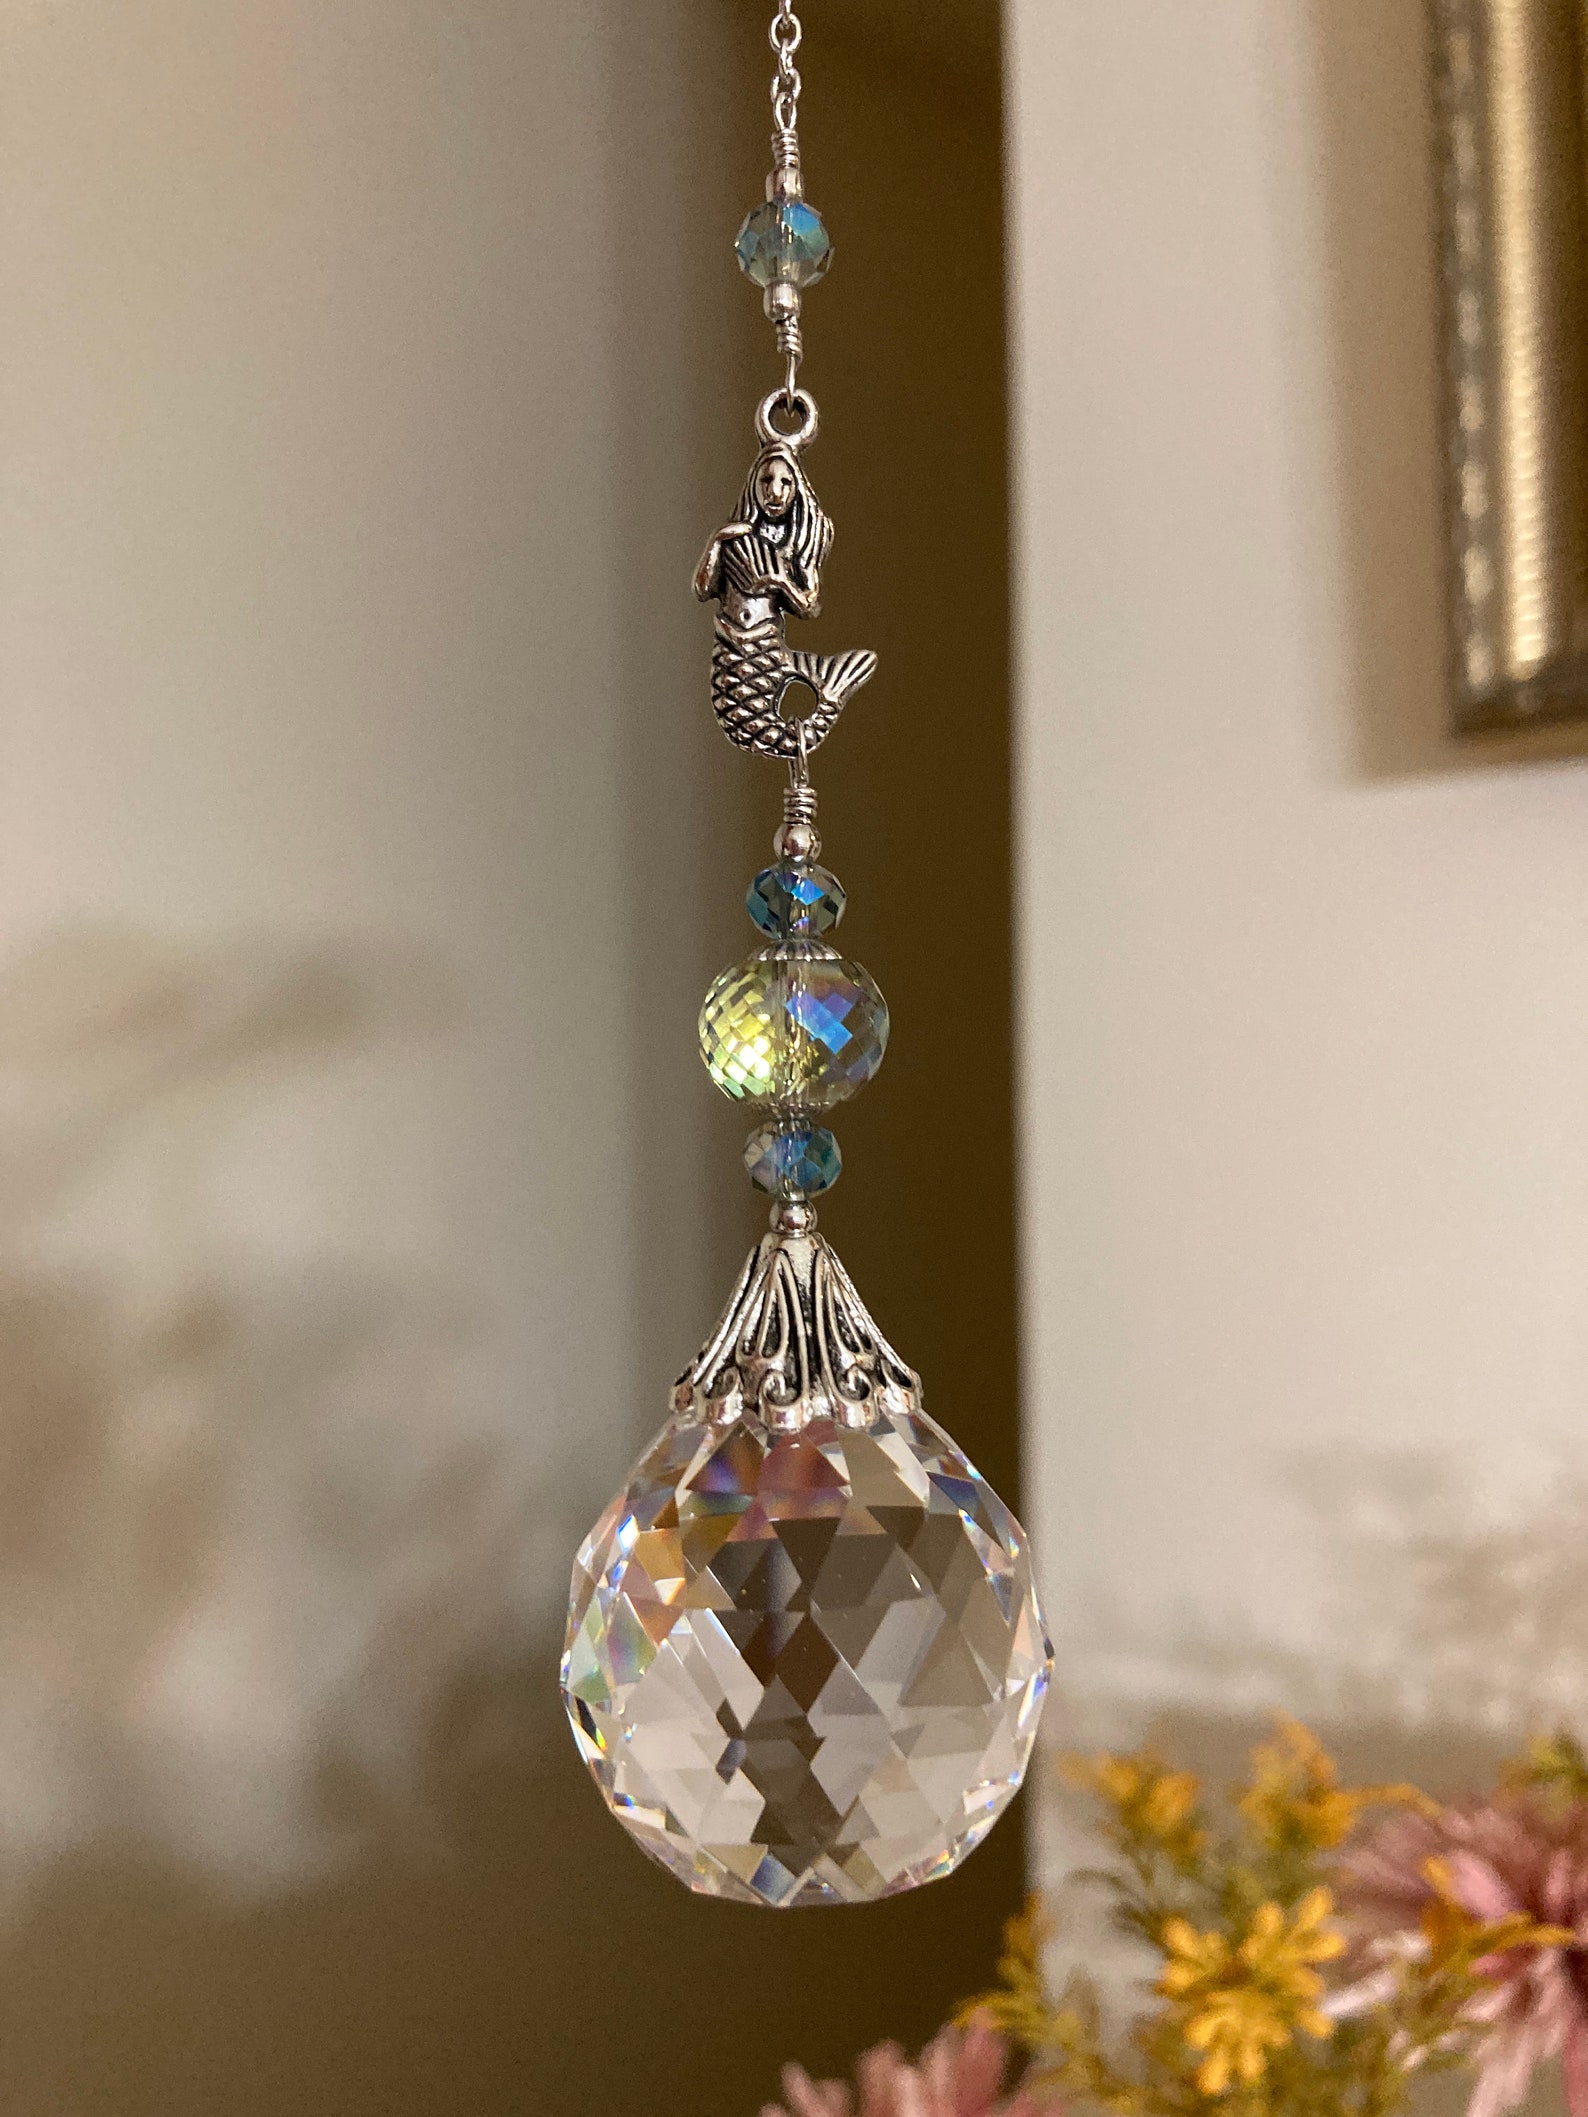 Mermaid sun catcher crystal ball prism hanging ornament Gift | Etsy